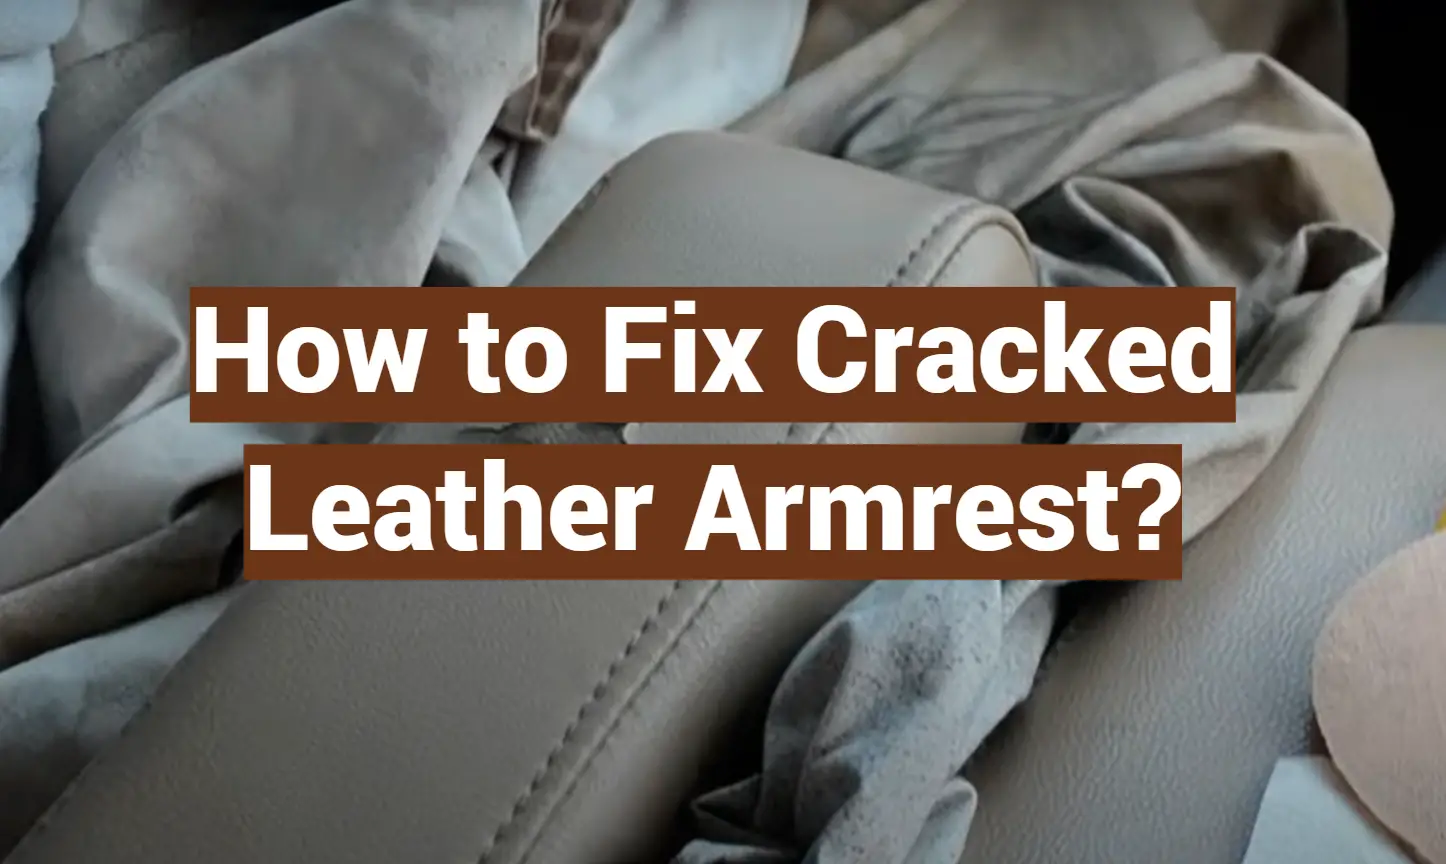 How to Fix Cracked Leather Armrest?